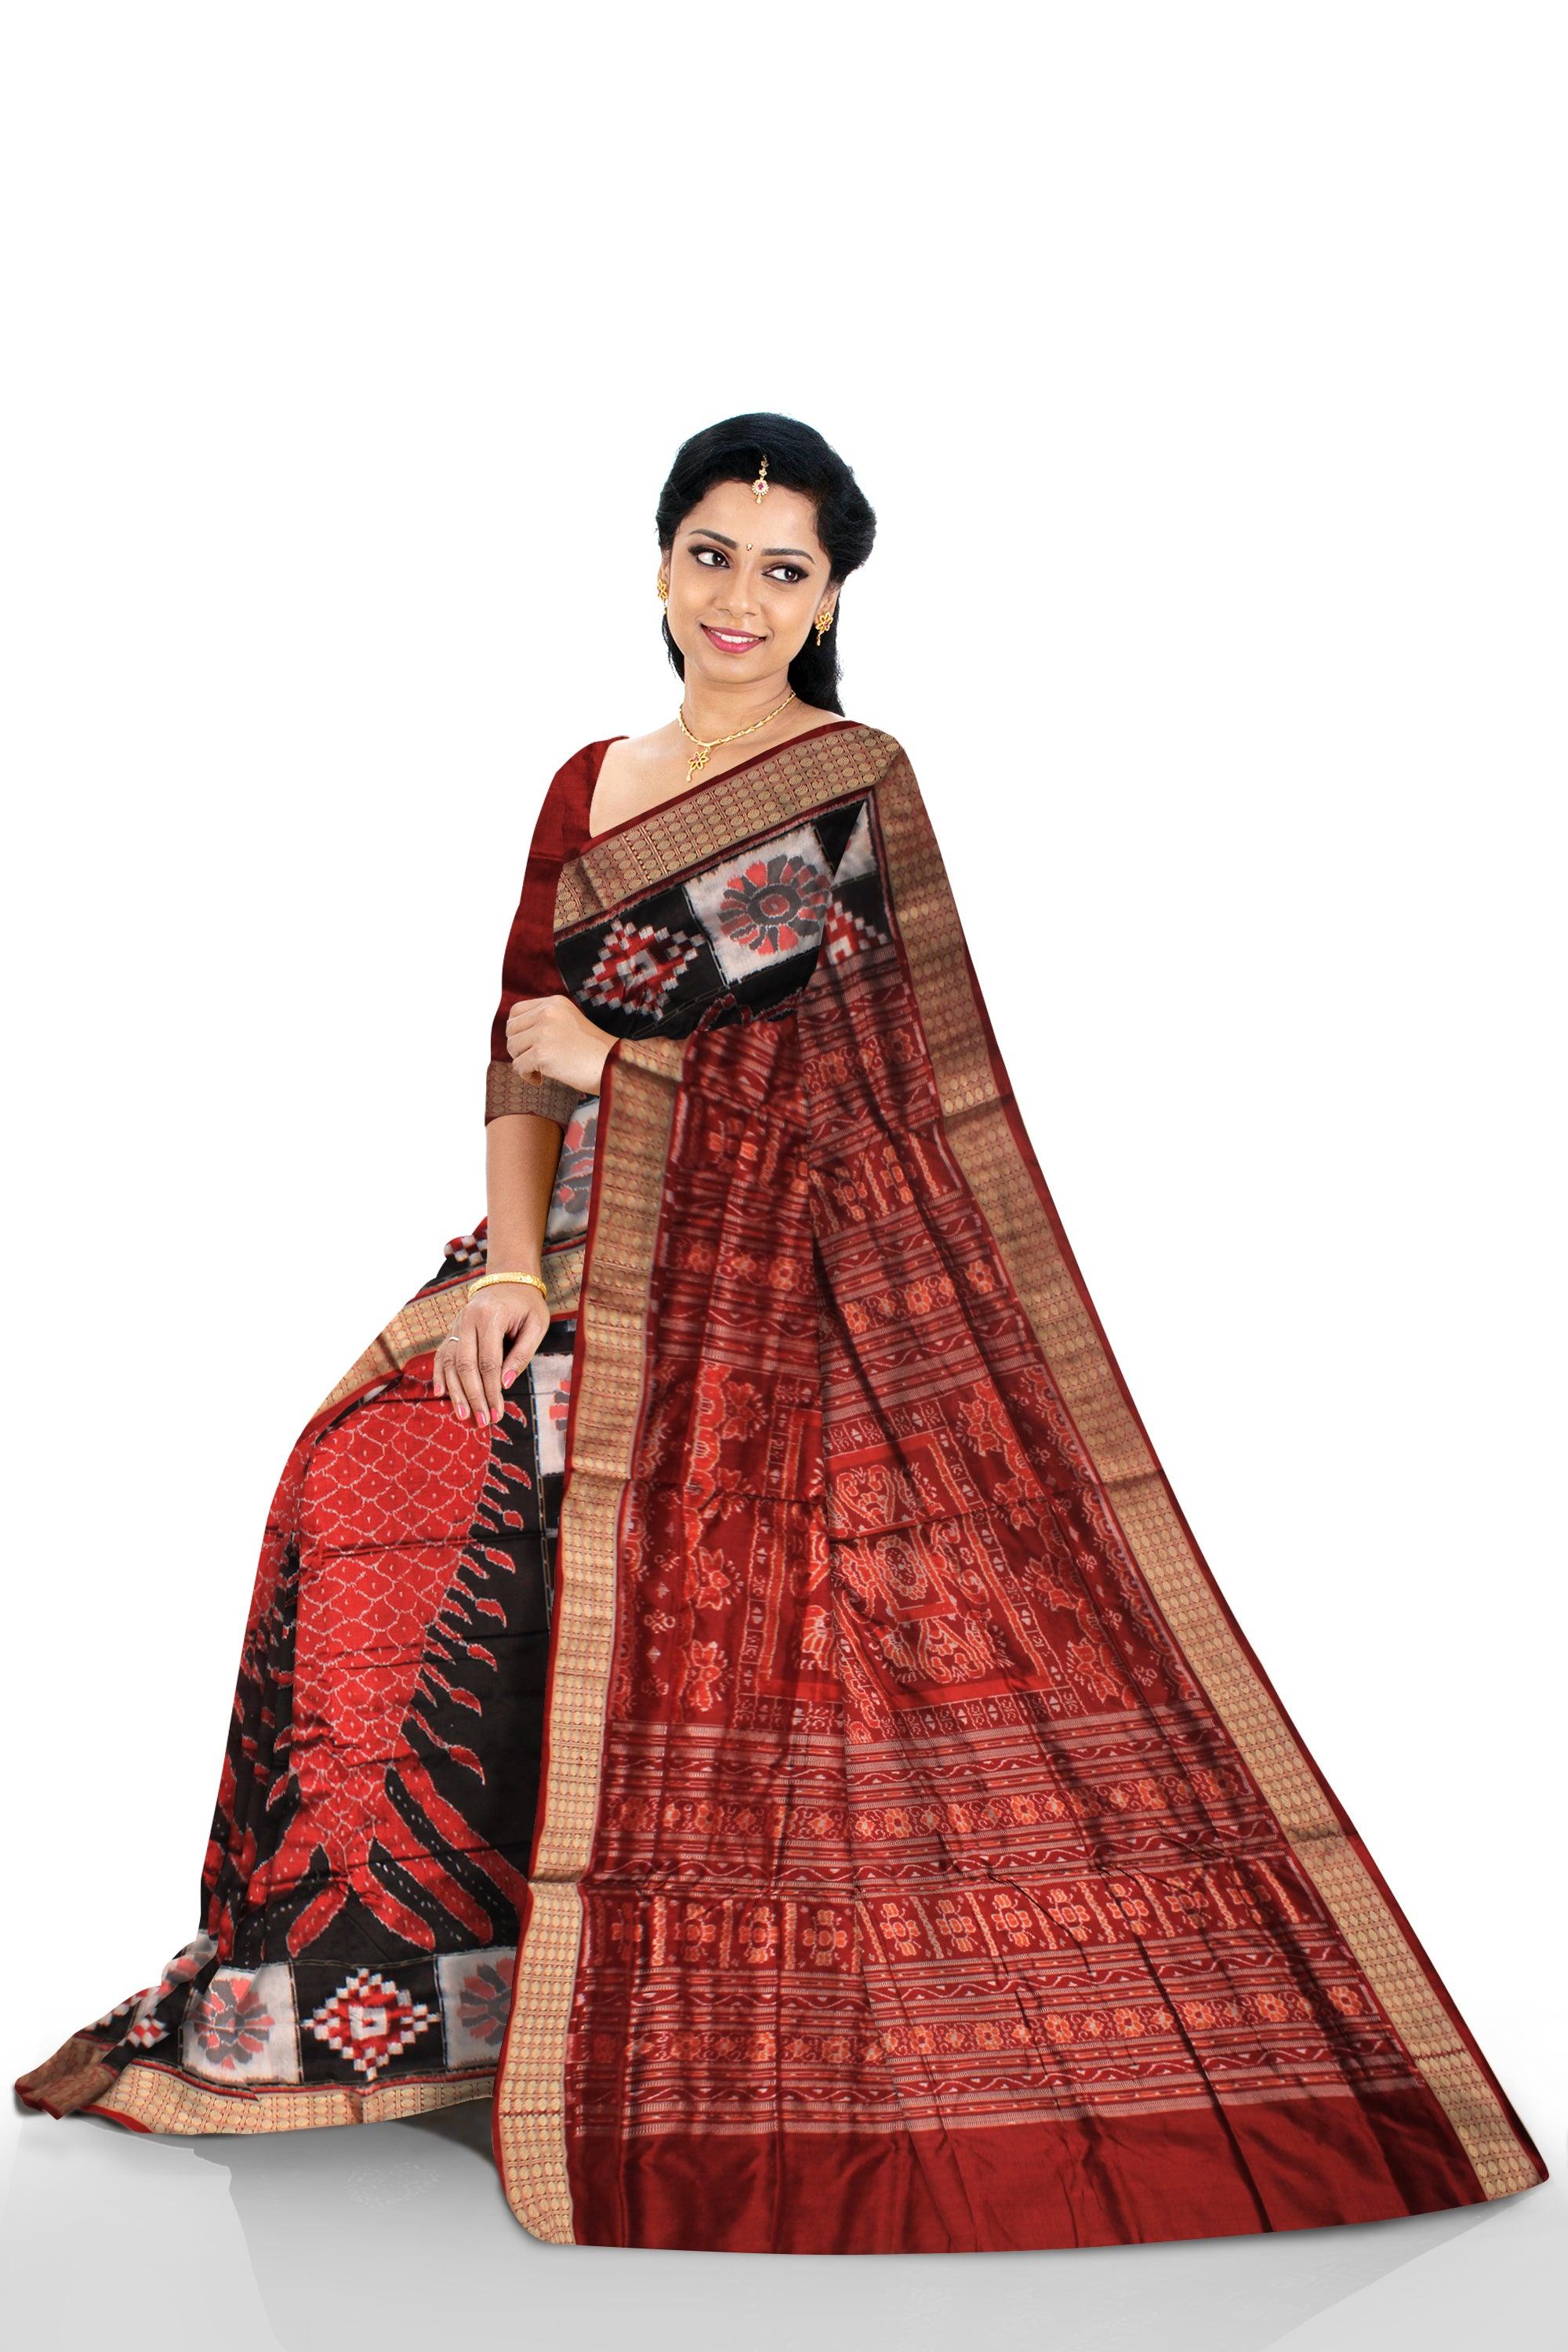 BIG FISH PATTERN PURE SILK SAREE IN BLACK,WHITE AND MAROON COLOR BASE, ATTACHED WITH BLOUSE PIECE. - Koshali Arts & Crafts Enterprise